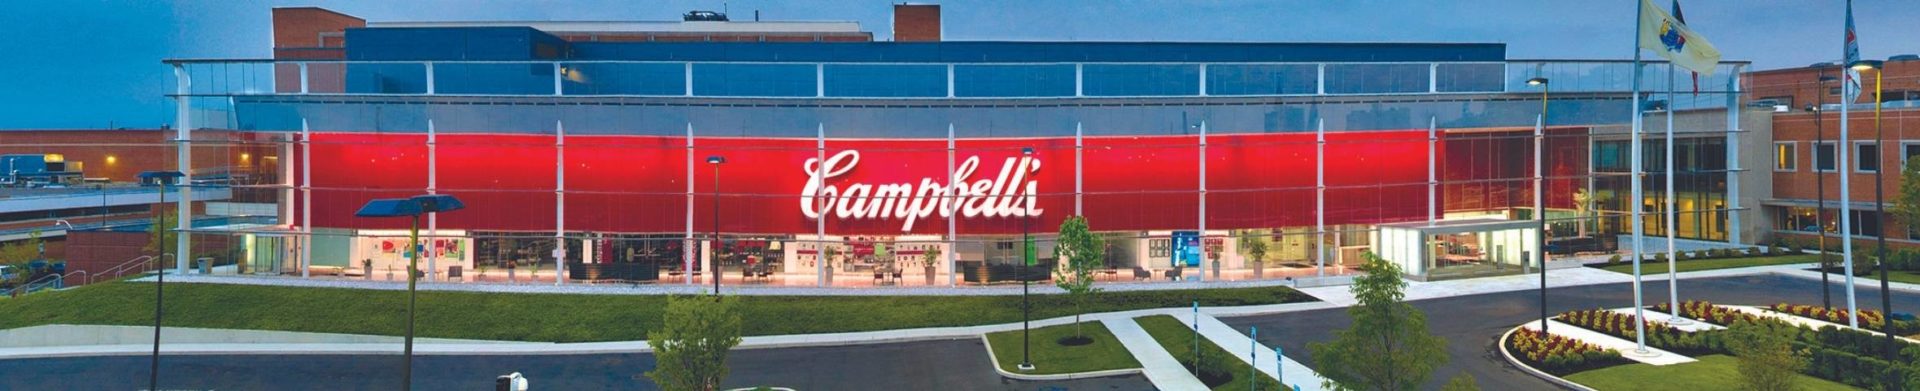 Campbell's headquarters